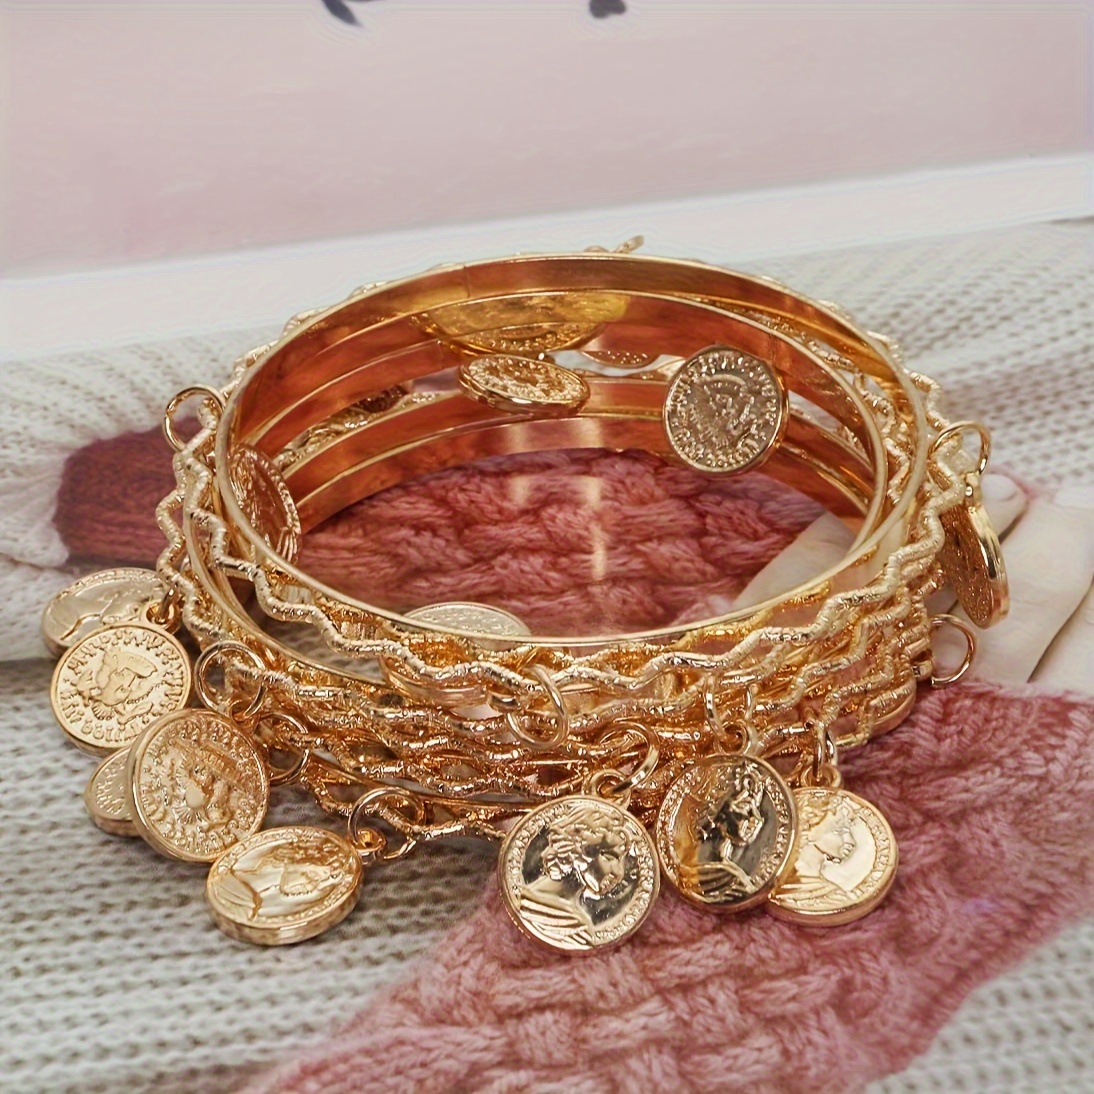 

5-piece Set, Golden Bracelet With Coin Charms, Middle Eastern Style, Fashion Sparkle Bangles For Women, Party Wear, Giftable, Everyday Chic Jewelry